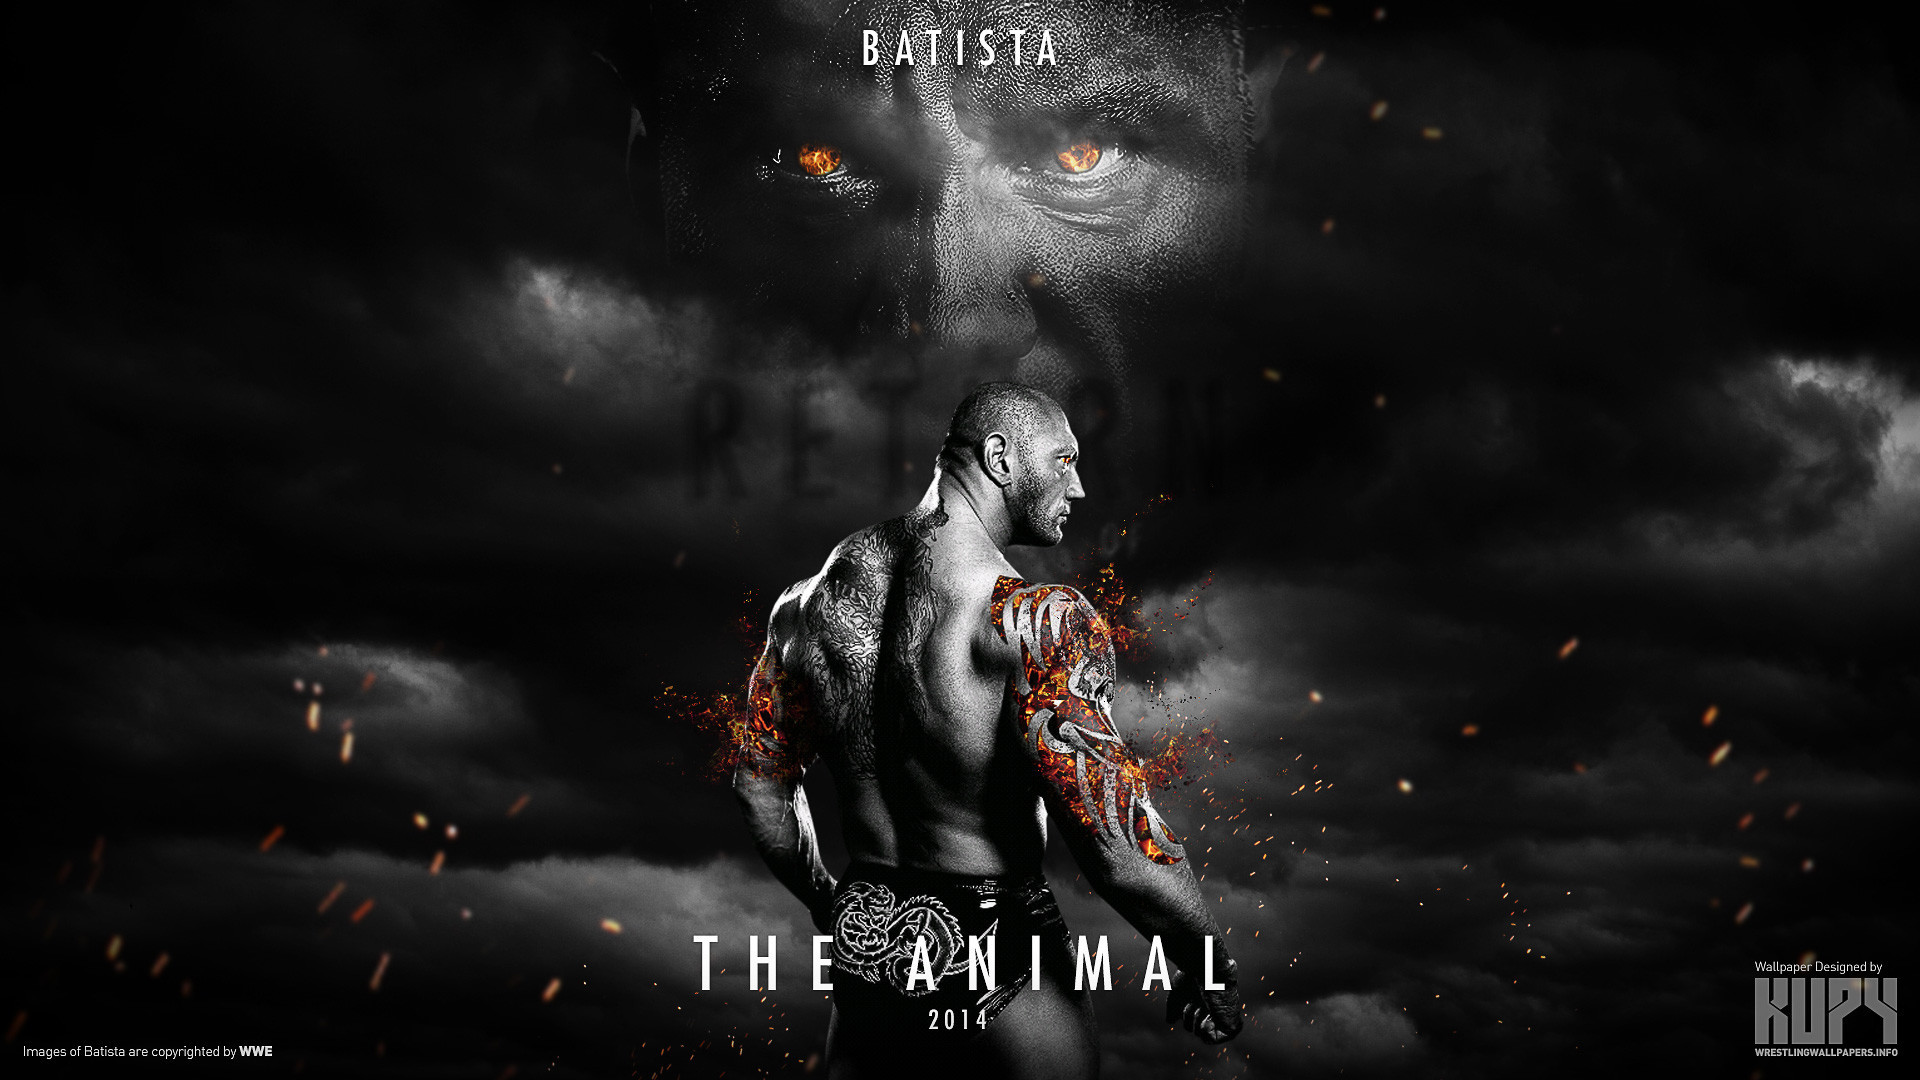 1920x1080  Download WWE Dave Batista 2014 Free wallpaper in Sports wallpapers  .